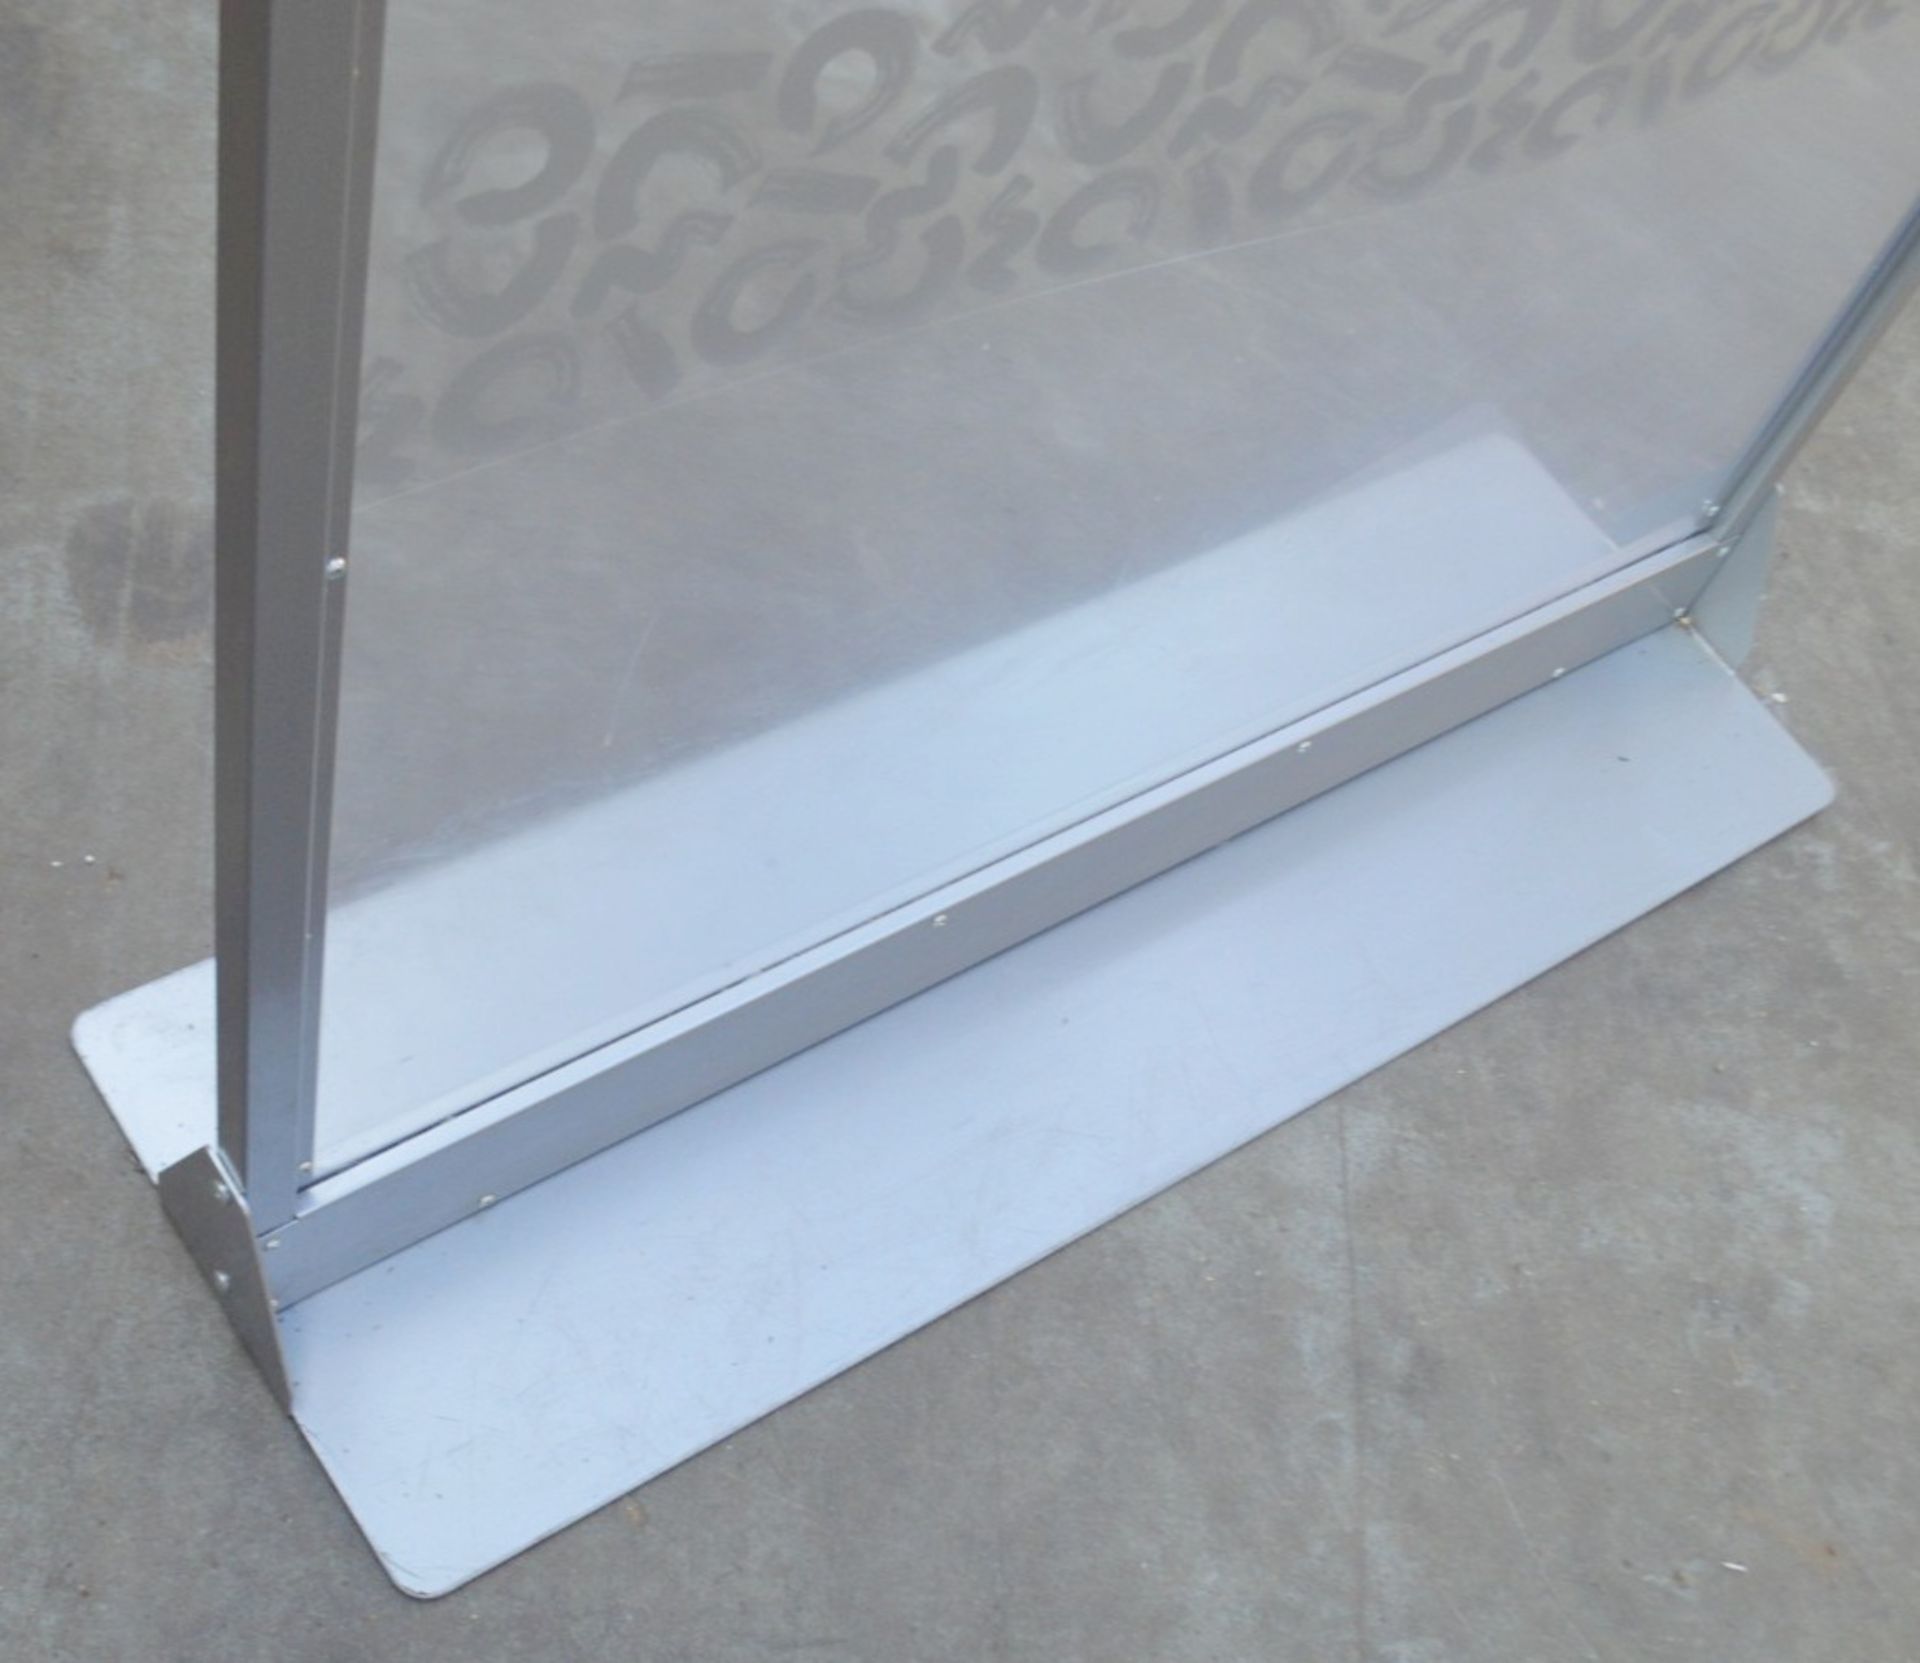 A Pair Of Freestanding 1.5-Metre Tall Protective Clear Acrylic Checkout Screen Dividers - Image 2 of 3